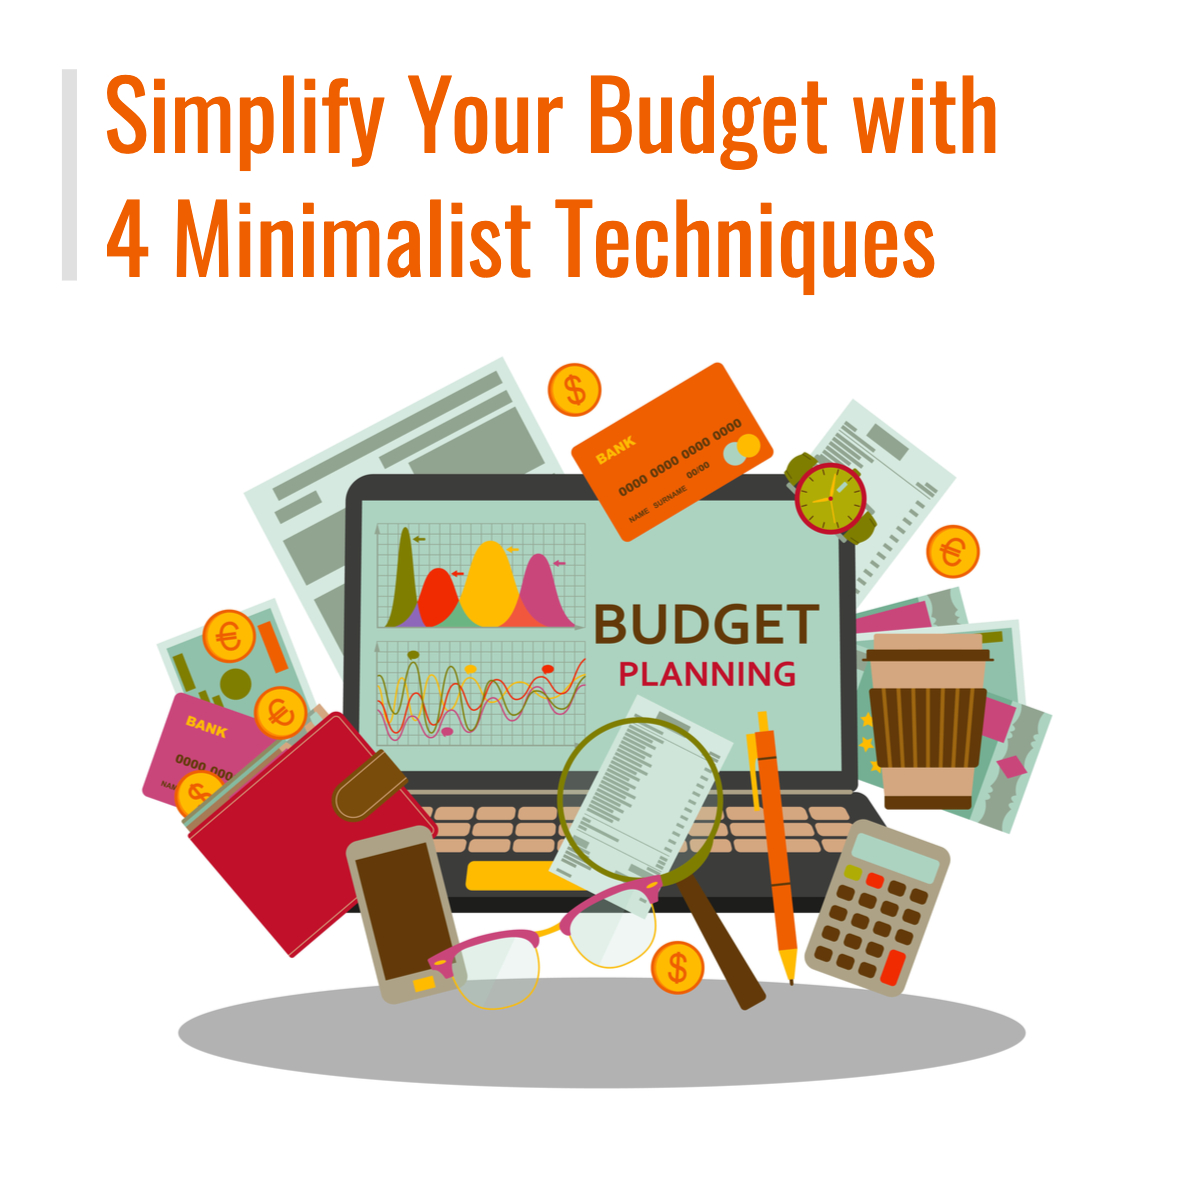 Simple budget tips